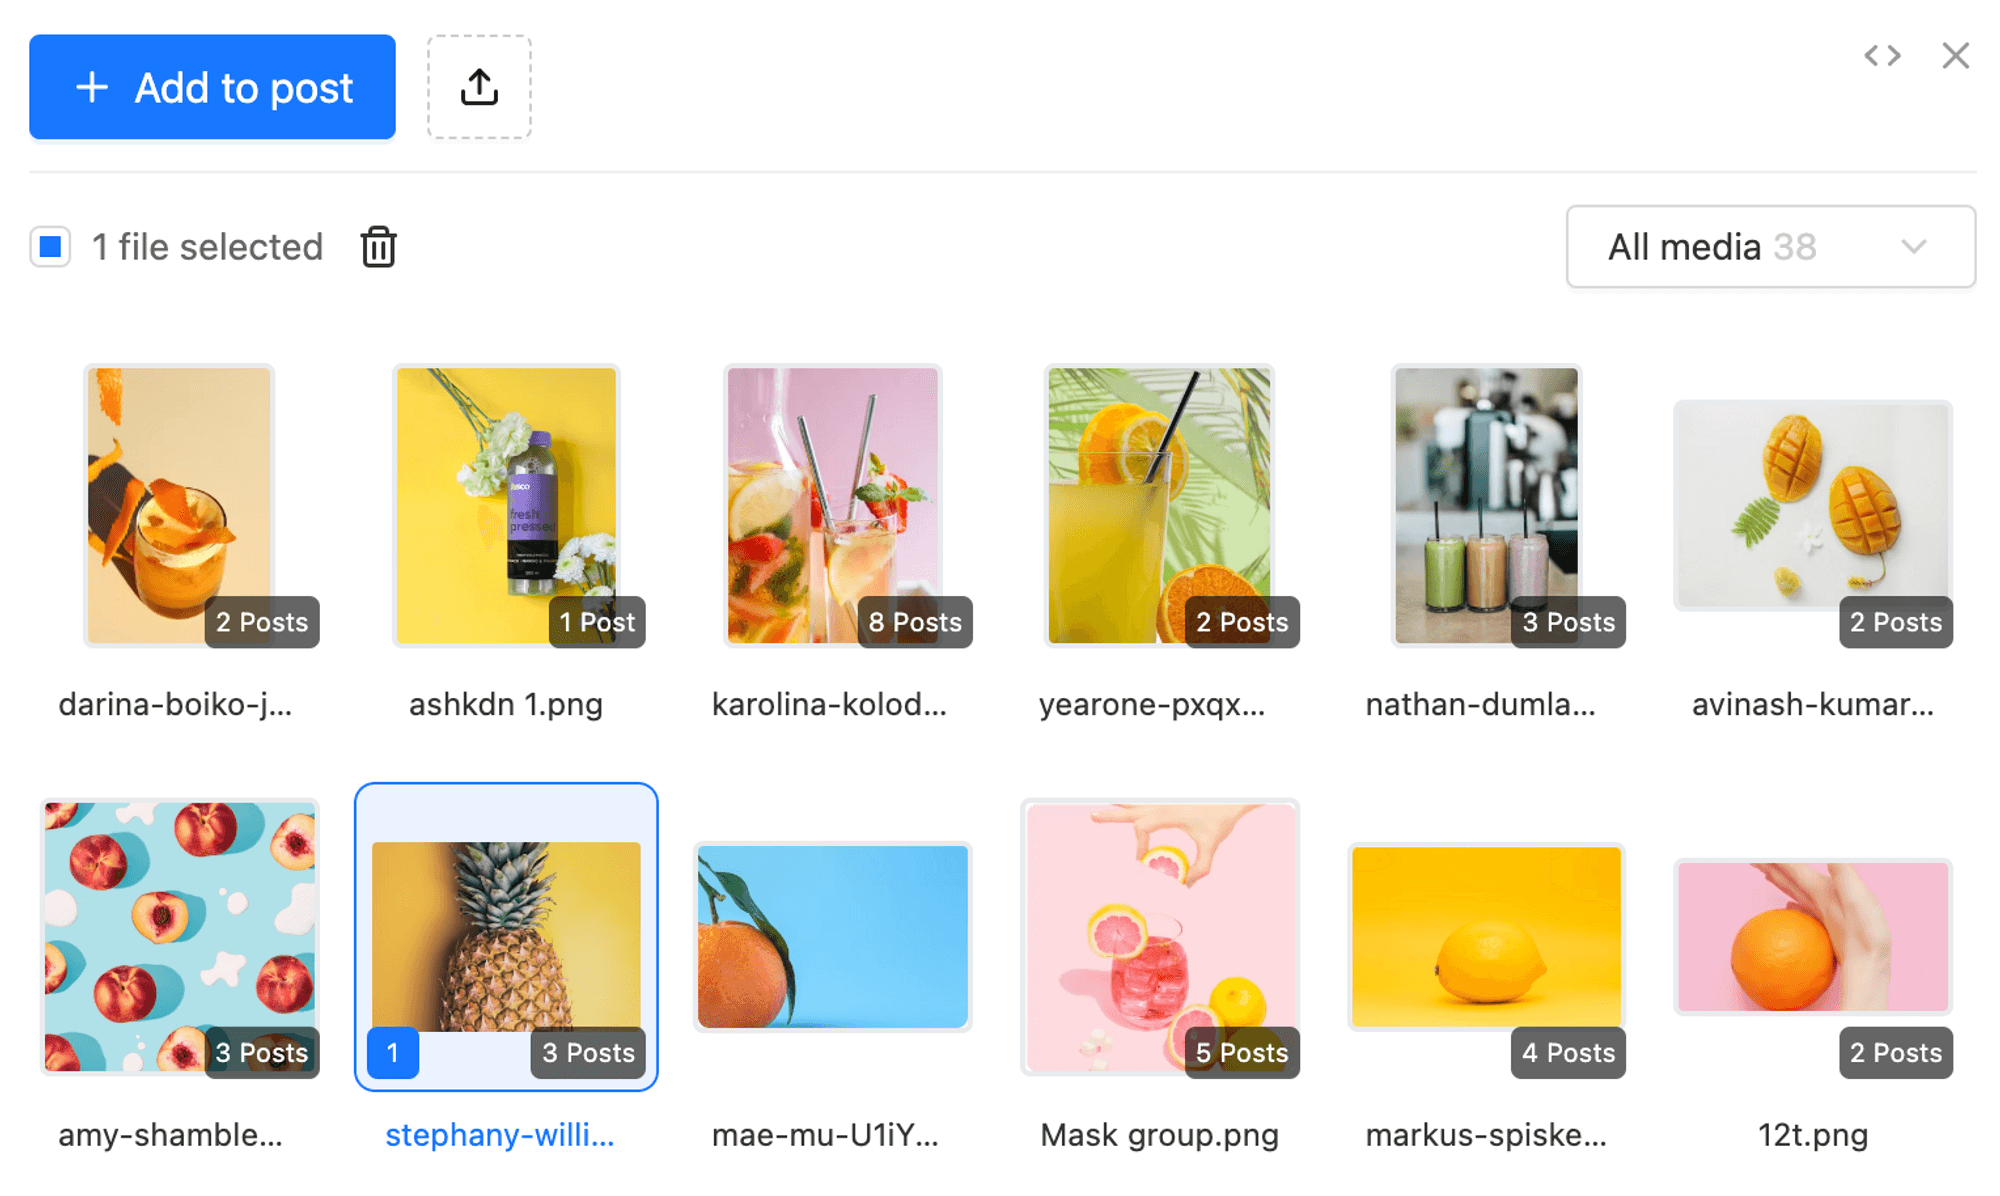 Content media library showing multiple images of cocktails and fruits, with one file selected and a blue "Add to post" button.